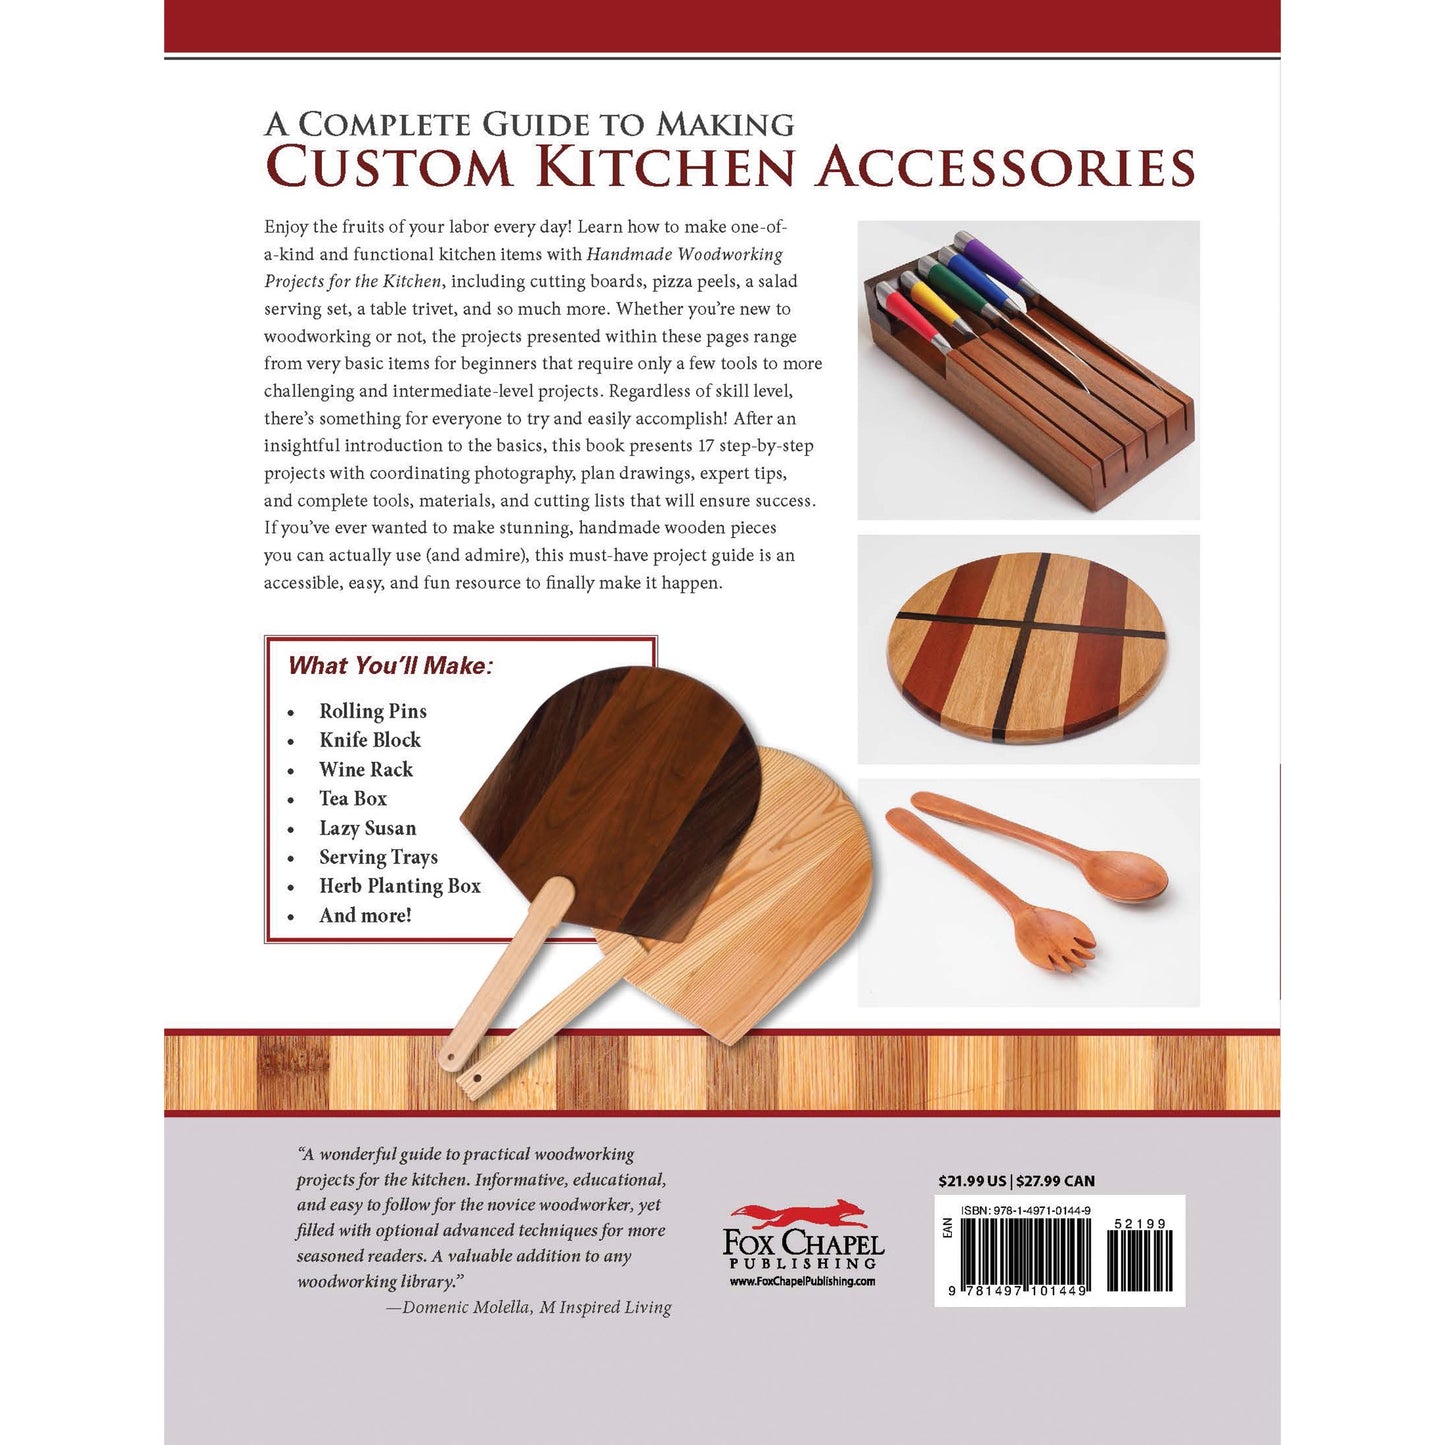 Handmade Woodworking Projects for the Kitchen alt 1